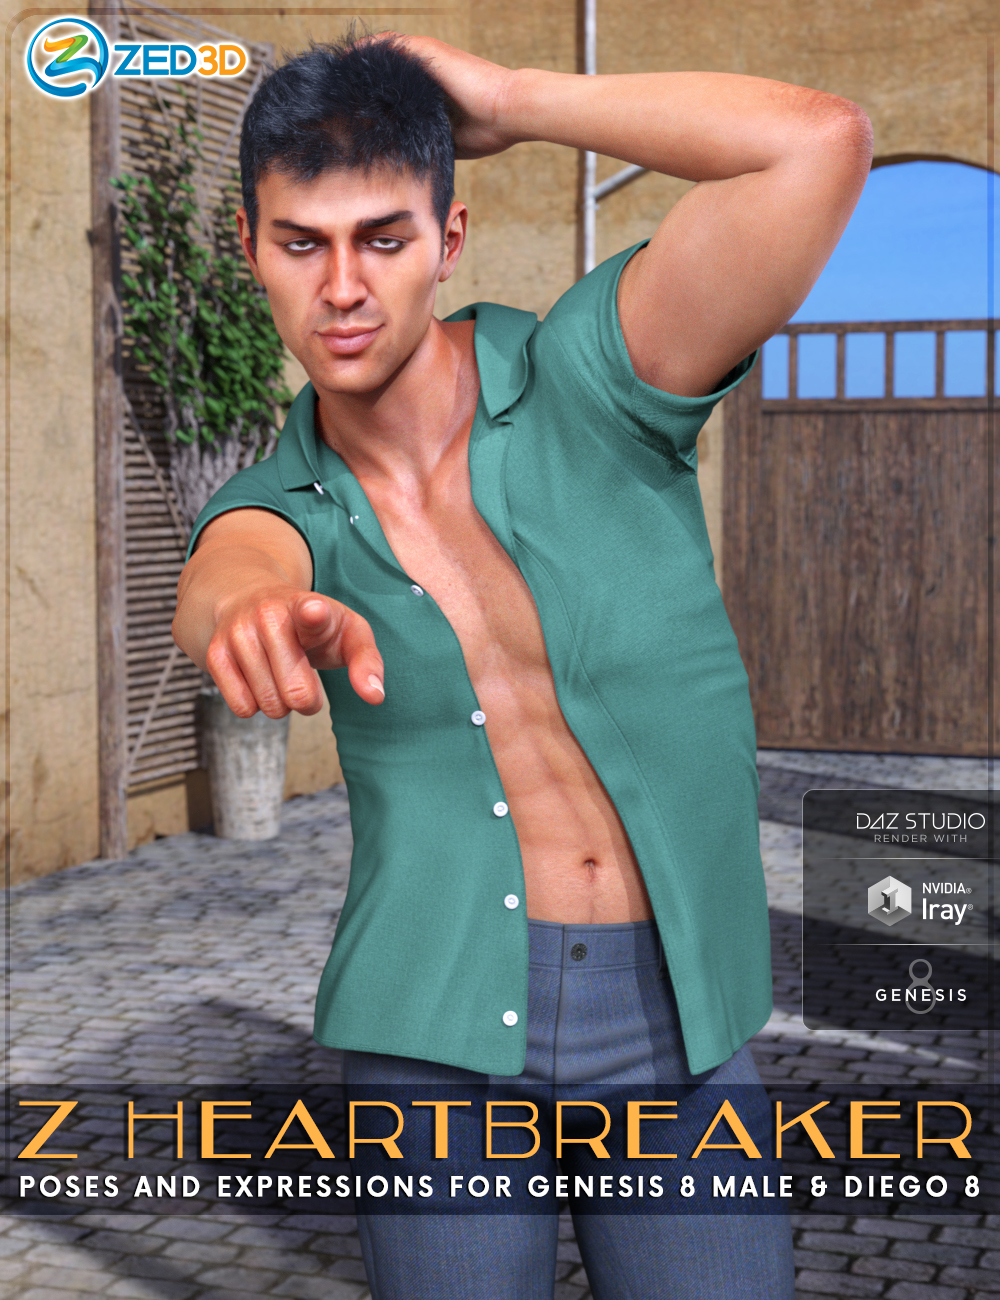 Z Heartbreaker Poses and Expressions for Genesis 8 Male and Diego 8